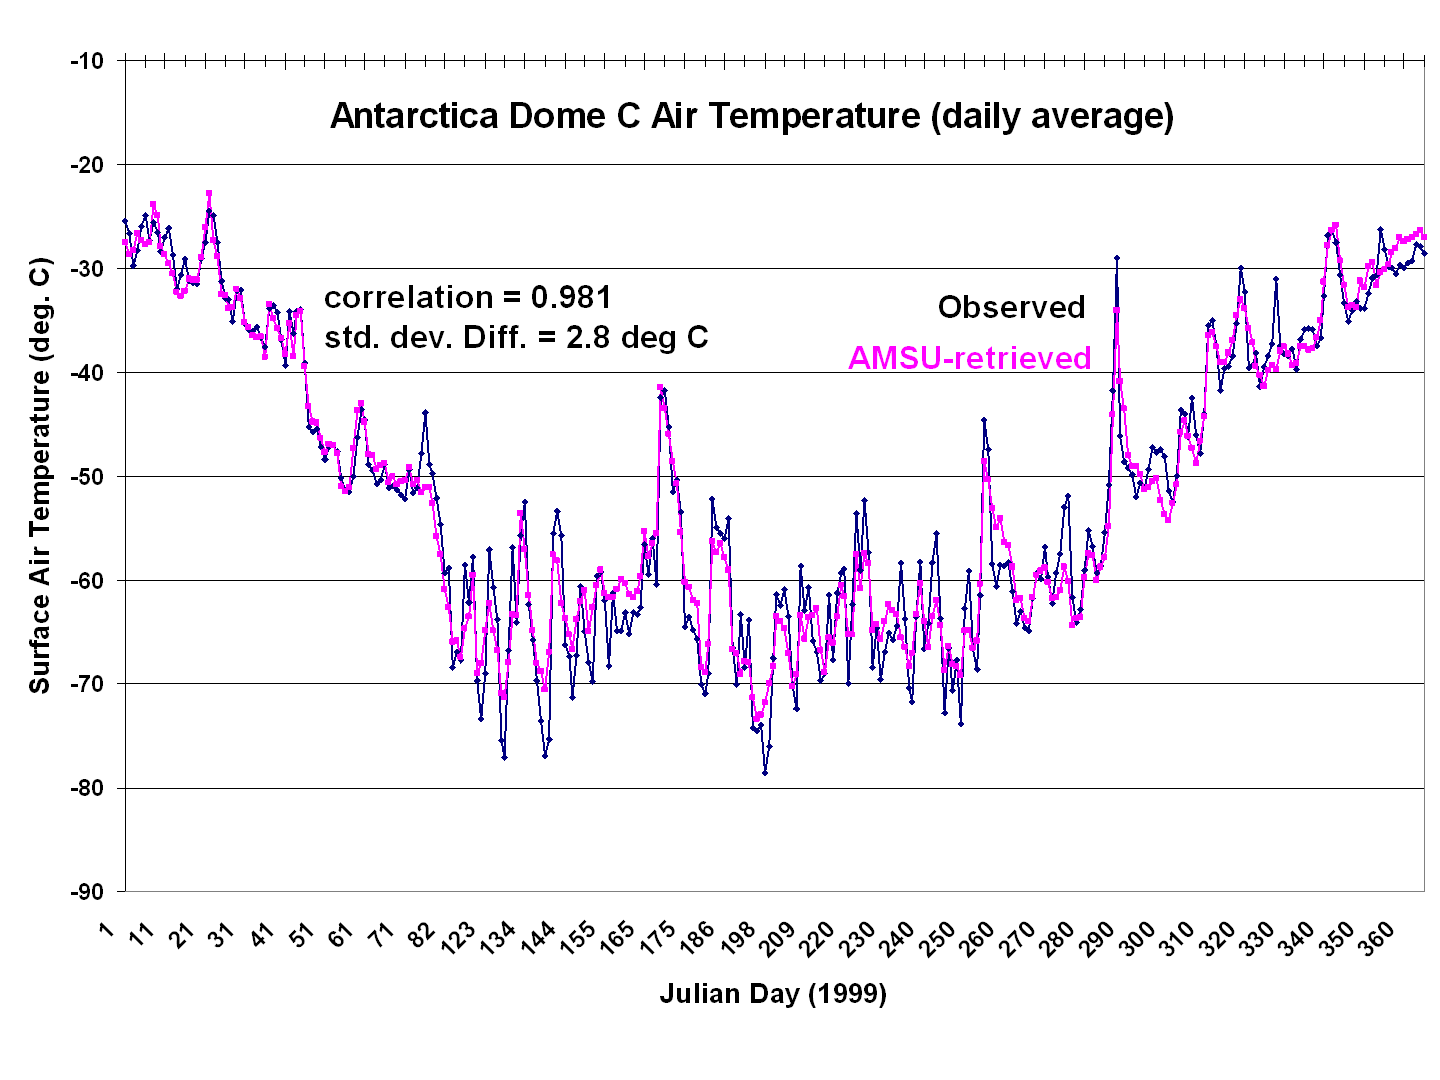 Fig. 1. Daily average surface air temperature at Dome C during 1999, as observed versus as retrieved from AMSU channels 1,2,3,4, & 15.